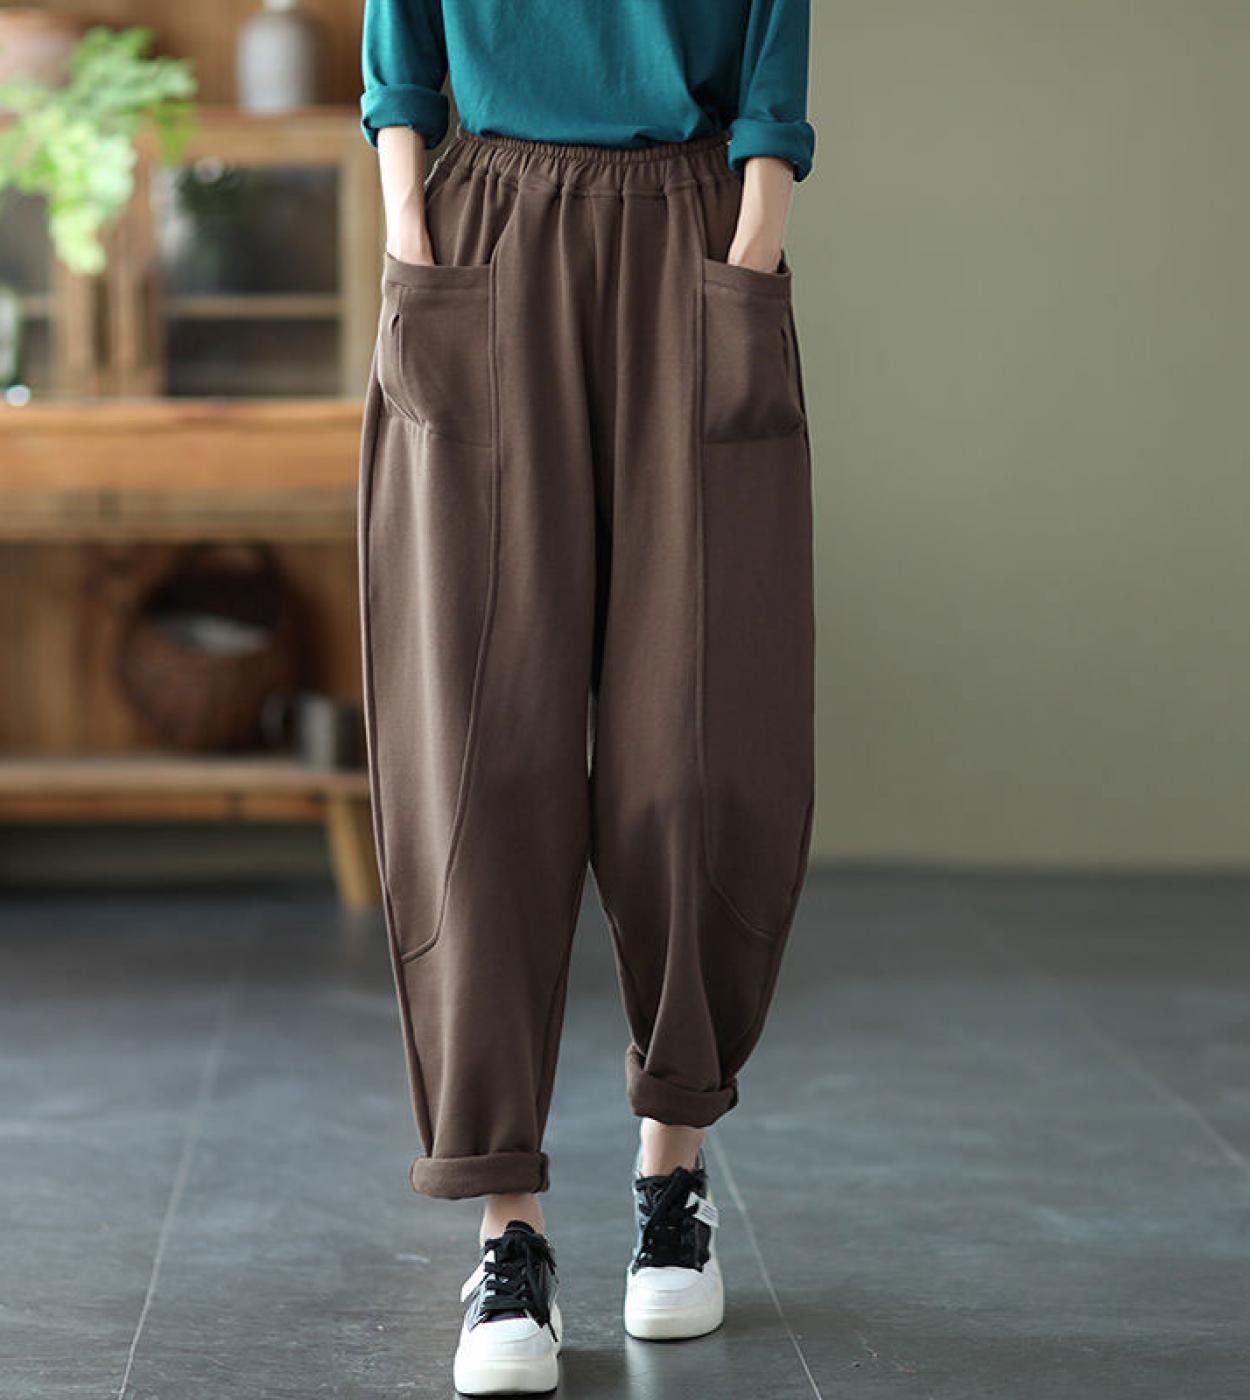 2022 Spring Autumn New Arts Style Women Elastic Waist Ankle Length Loose Pants All Matched Casual Cotton Harem Pants V62